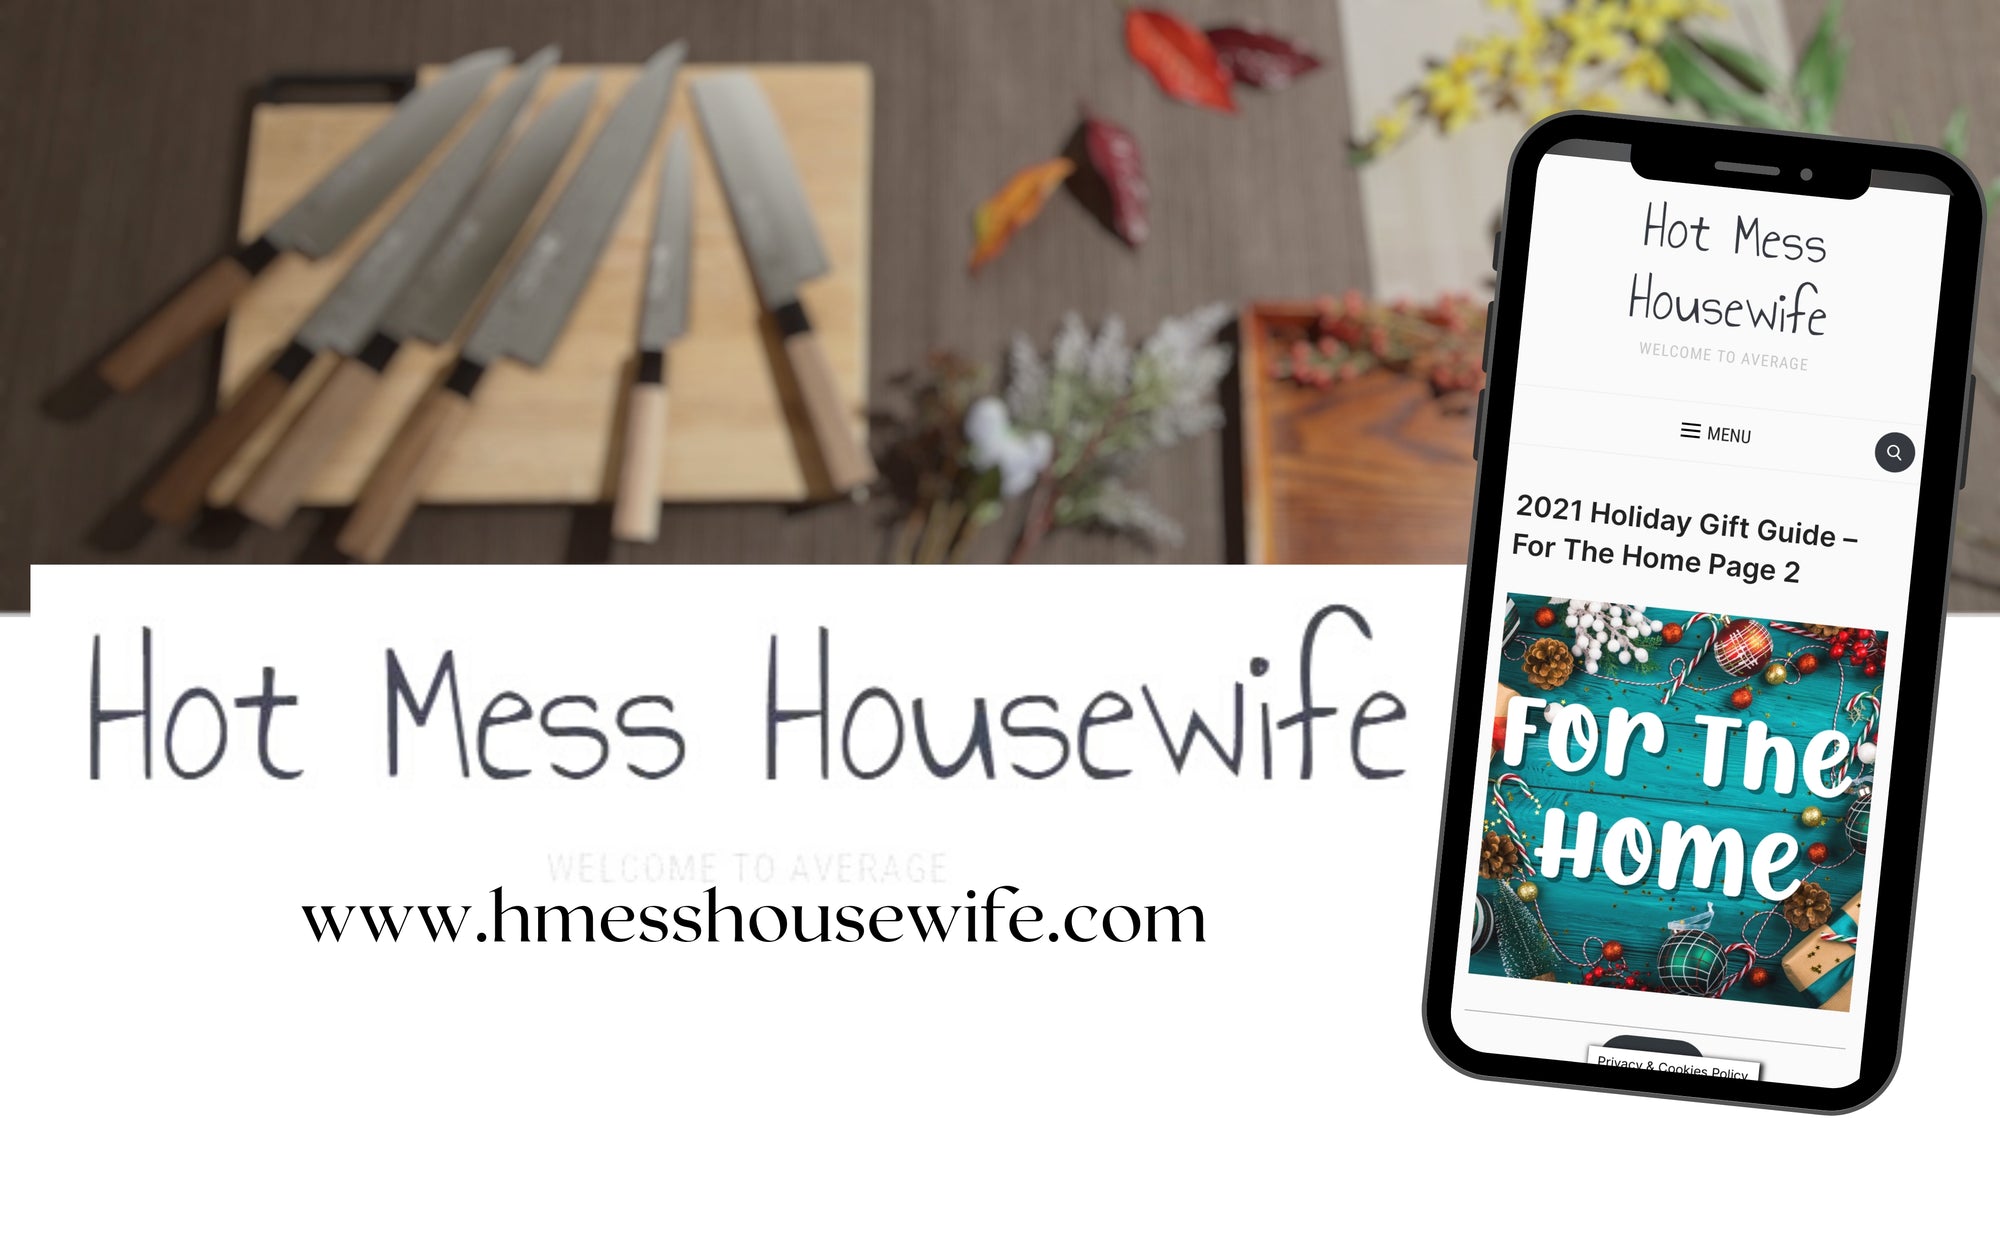 Syosaku-Japan was Featured in Hot Mess Housewife